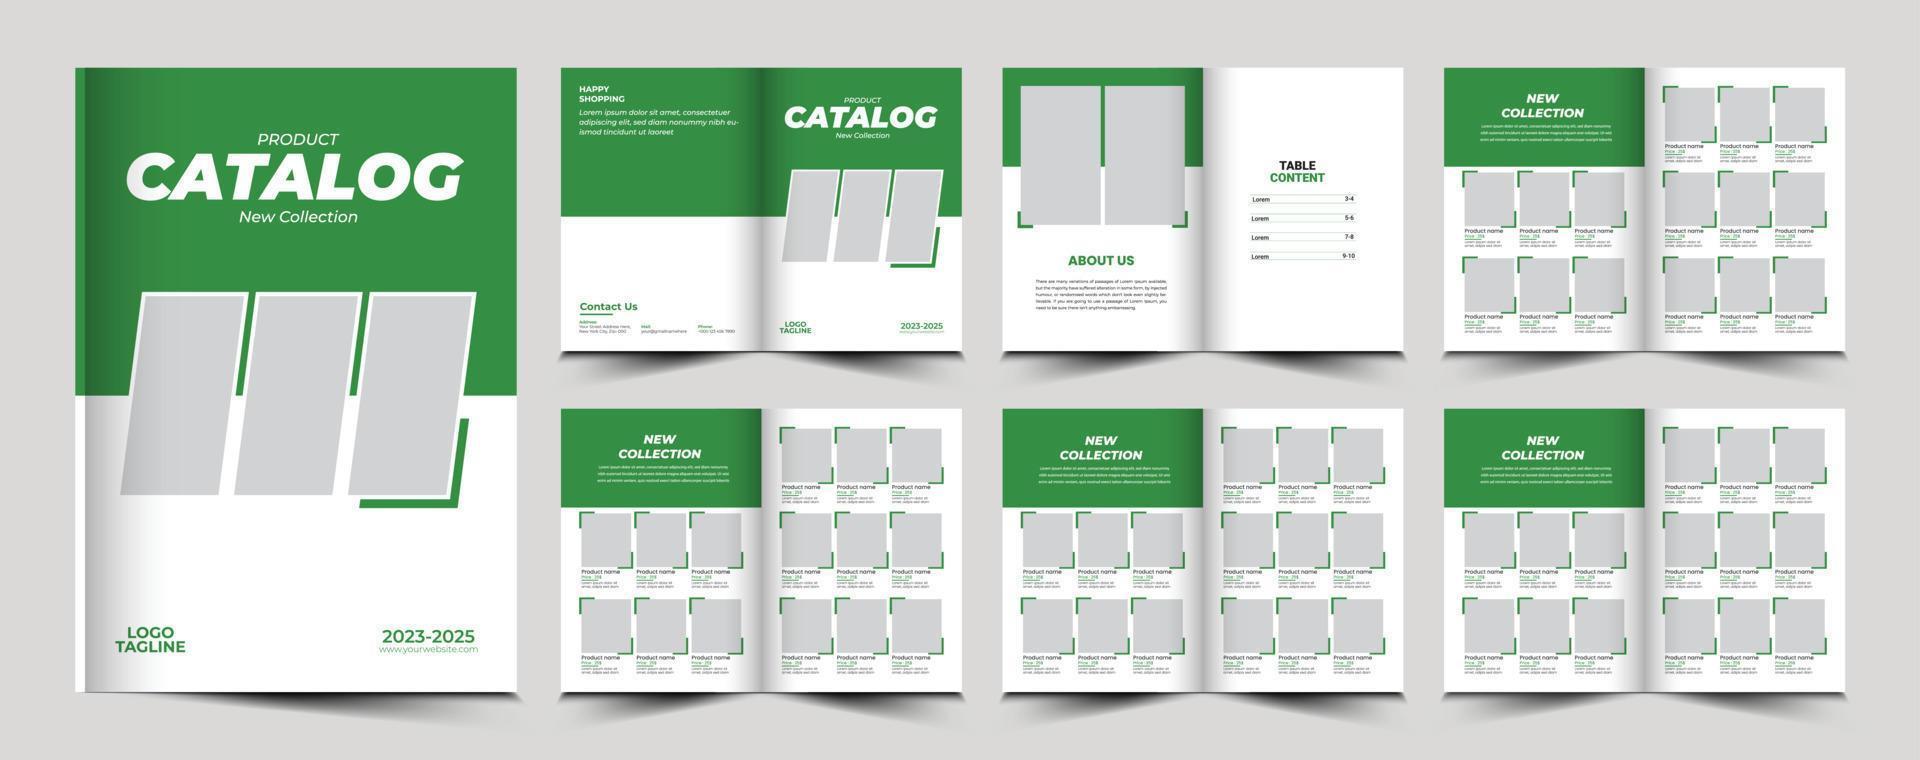 Product catalogus of catalogus sjabloon ontwerp vector